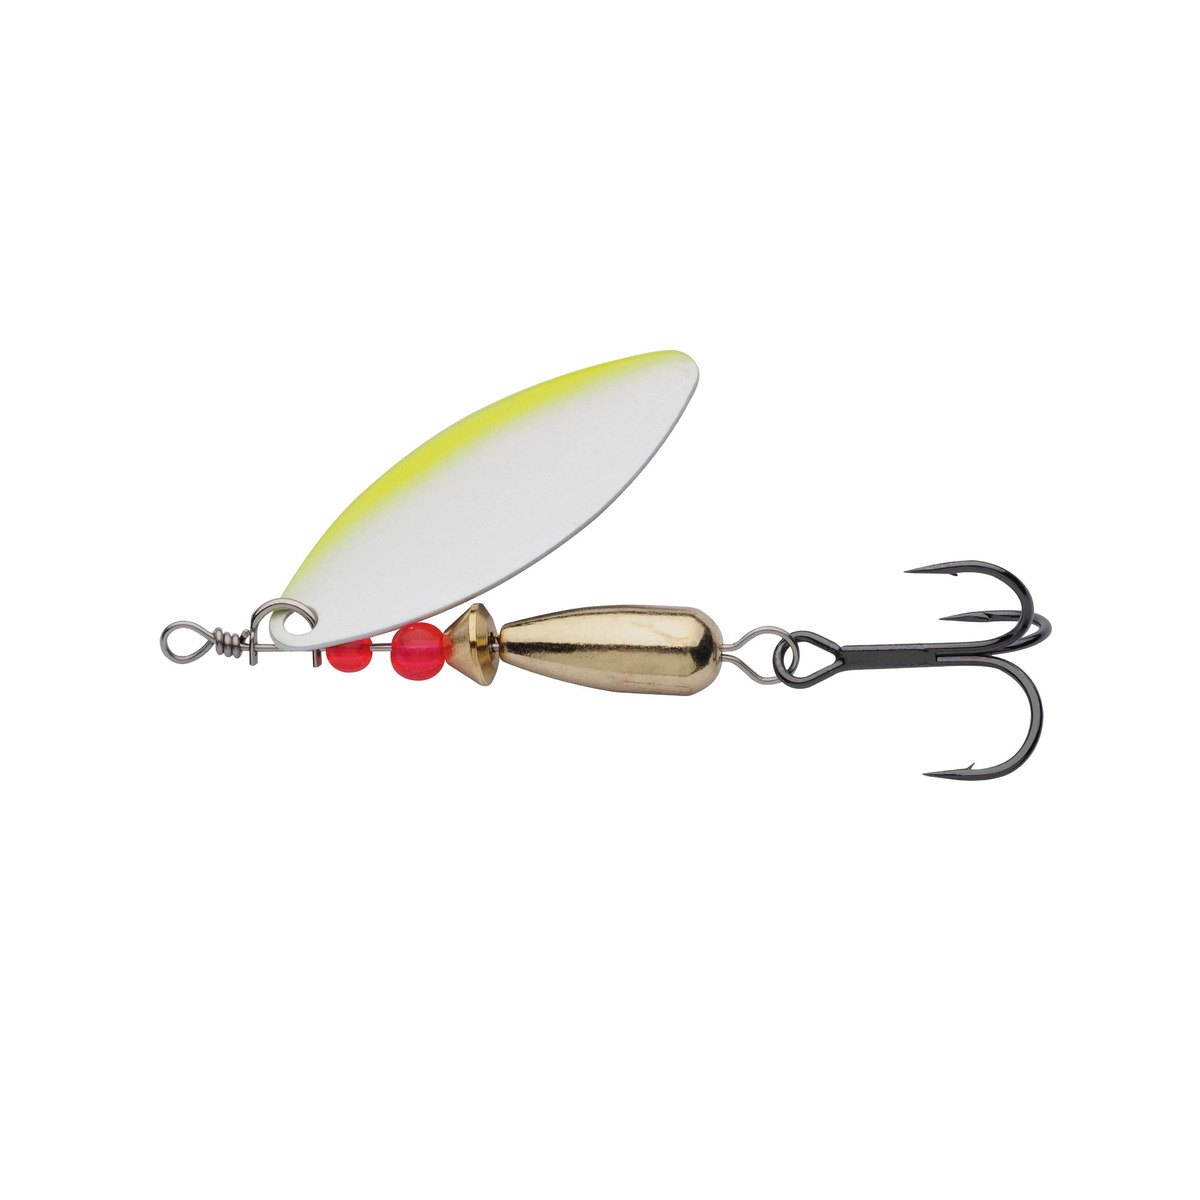 Abu Garcia Droppen Vide Spinners 14 G - Chartreuse Pearl Holo - 60 mm